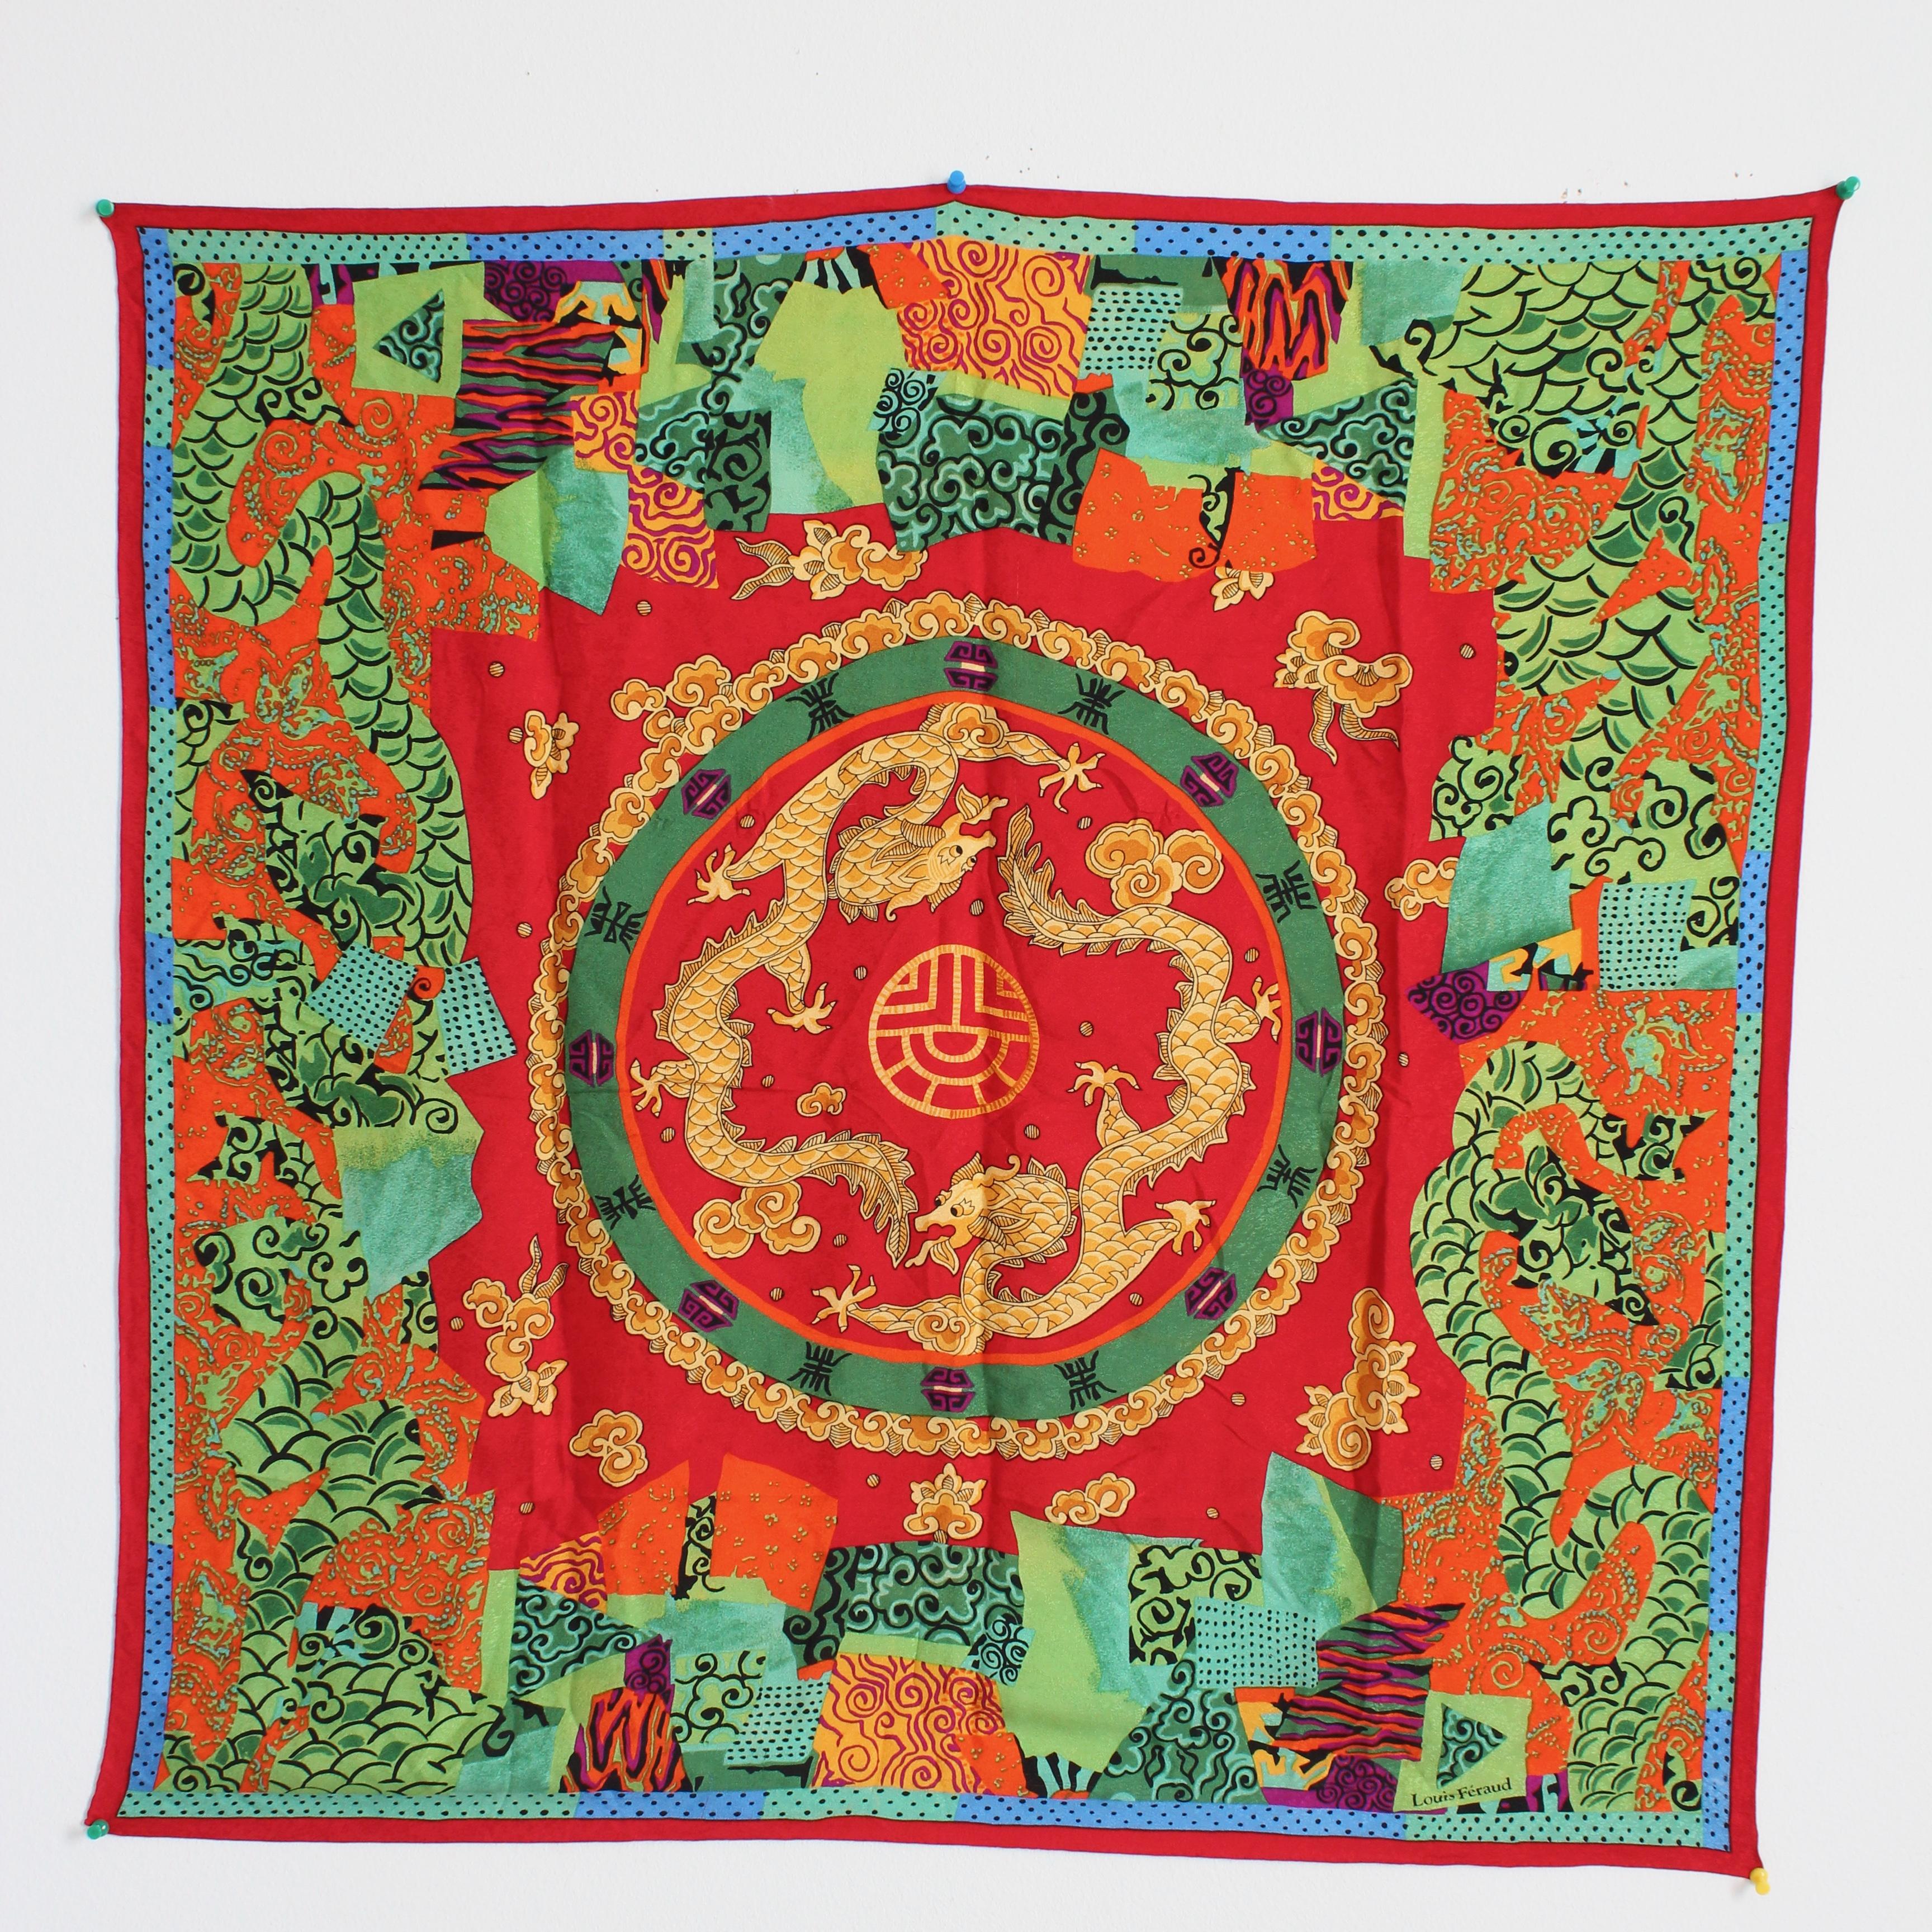 This lovely silk jacquard scarf or shawl was made by Louis Feraud, most likely in the late 1980s. Made from a gorgeous red silk, it features dancing golden dragons and other Asian motifs and symbols. 

A gorgeous scarf or shawl that can be styled in